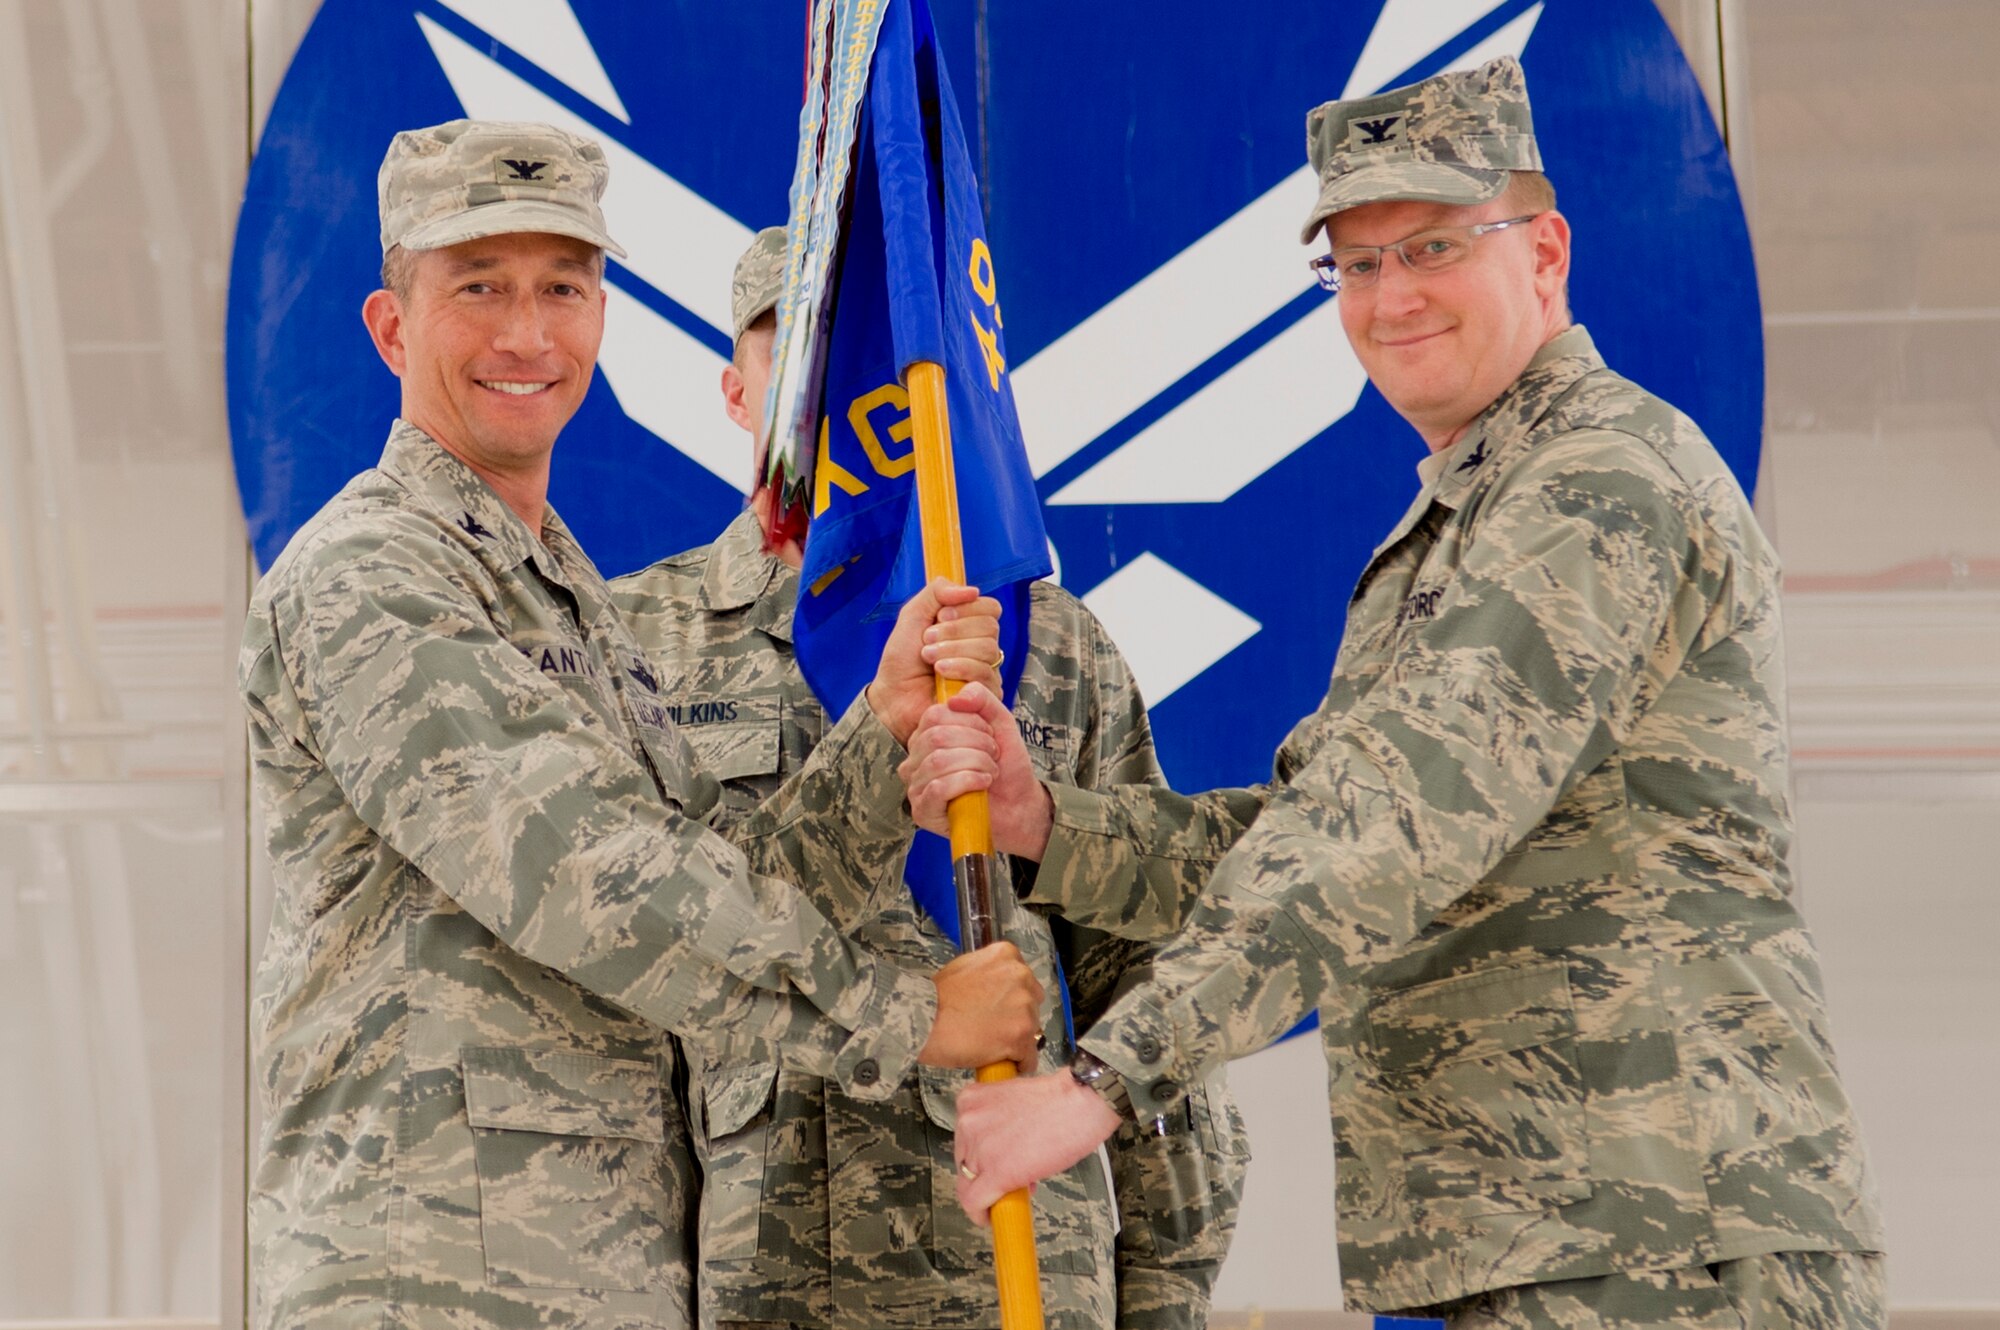 Col. Houston Cantwell, 49th Wing commander, gives the 49th Maintenance Group guidon to Col. Tim Harbor during a change of command ceremony at Holloman Air Force Base, N.M., June 30, 2017. During the ceremony, Col. Harbor took command of the 49th MXG from Col. Lyle Drew, 49th MXG outgoing commander. (U.S. Air Force photo by Tech. Sgt. Amanda Junk)